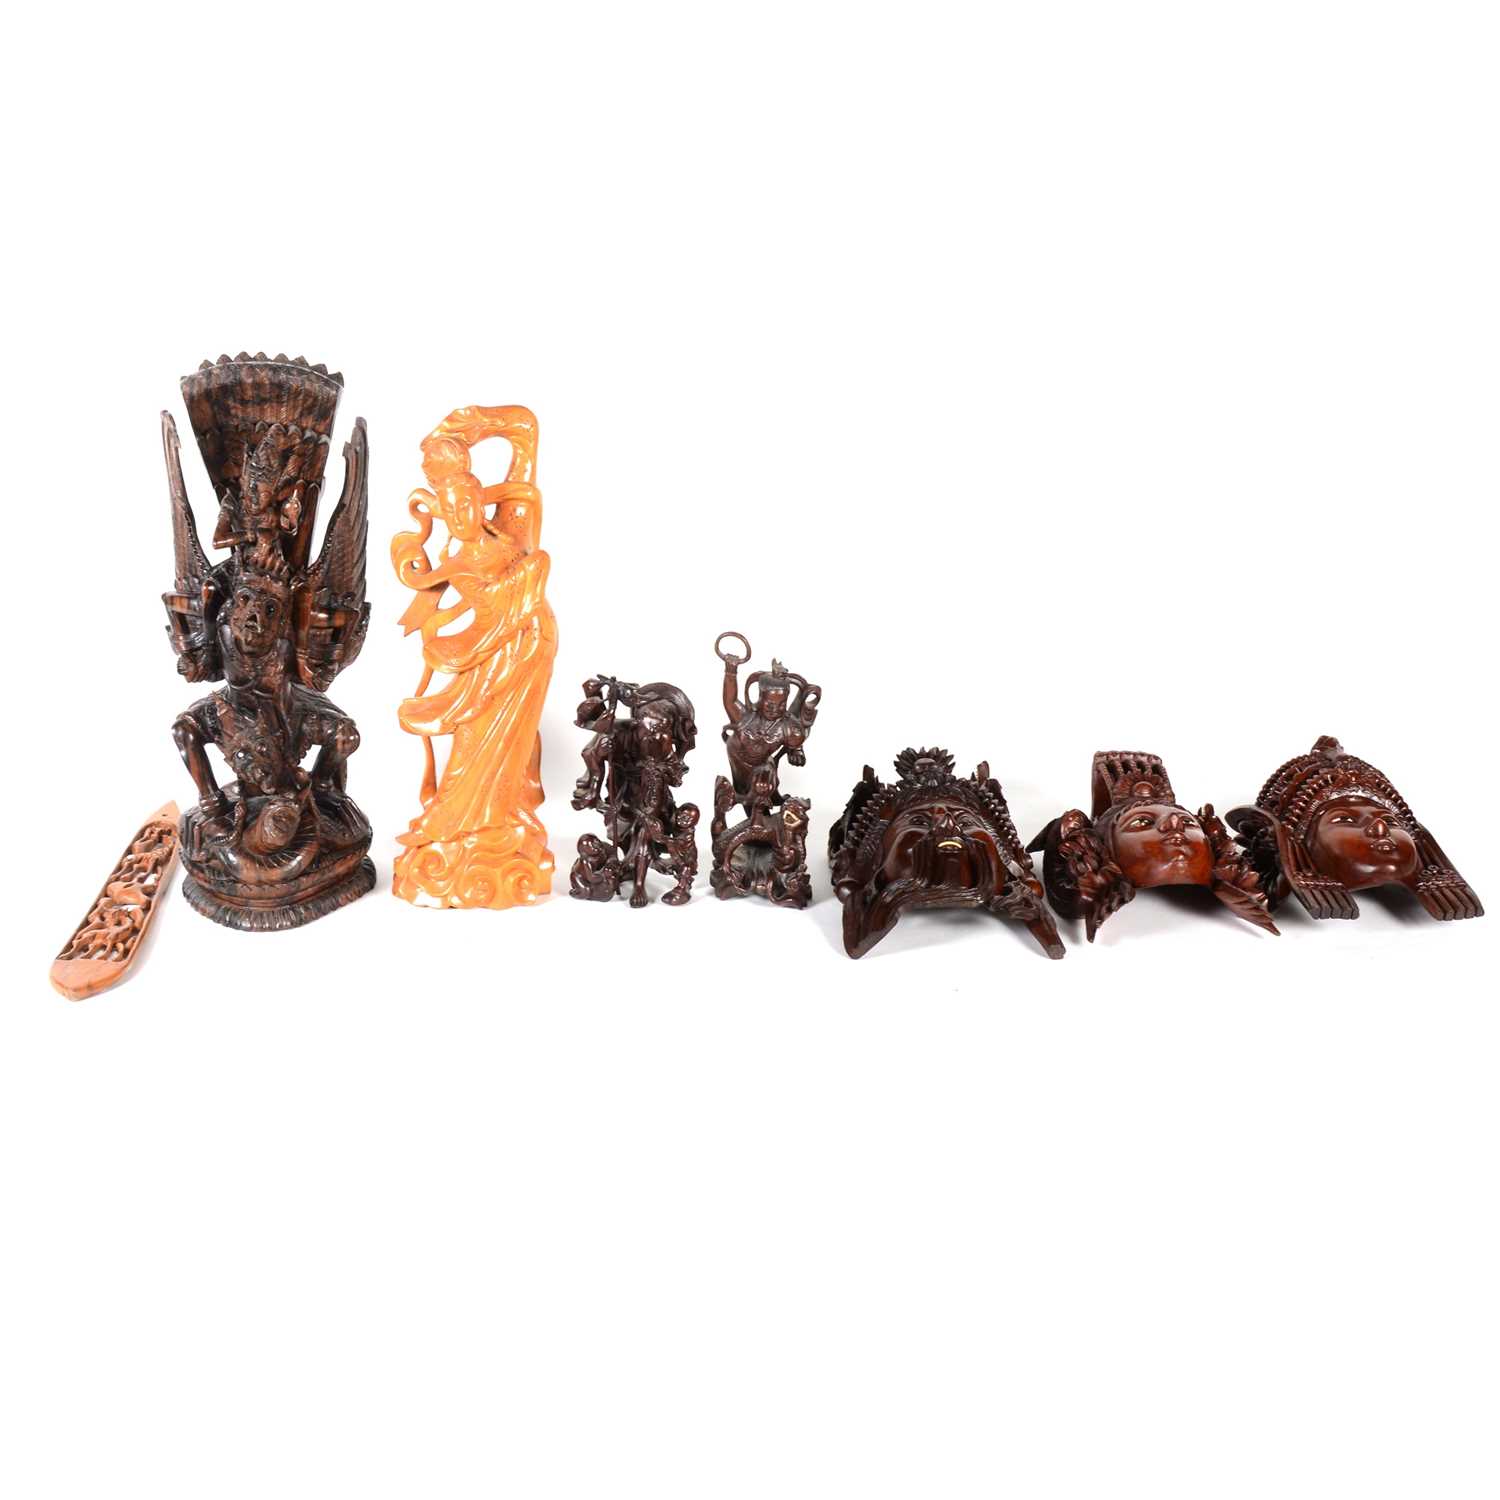 Lot 118 - Three Asian carved wooden wall masks, a large Balinese group carving, and others